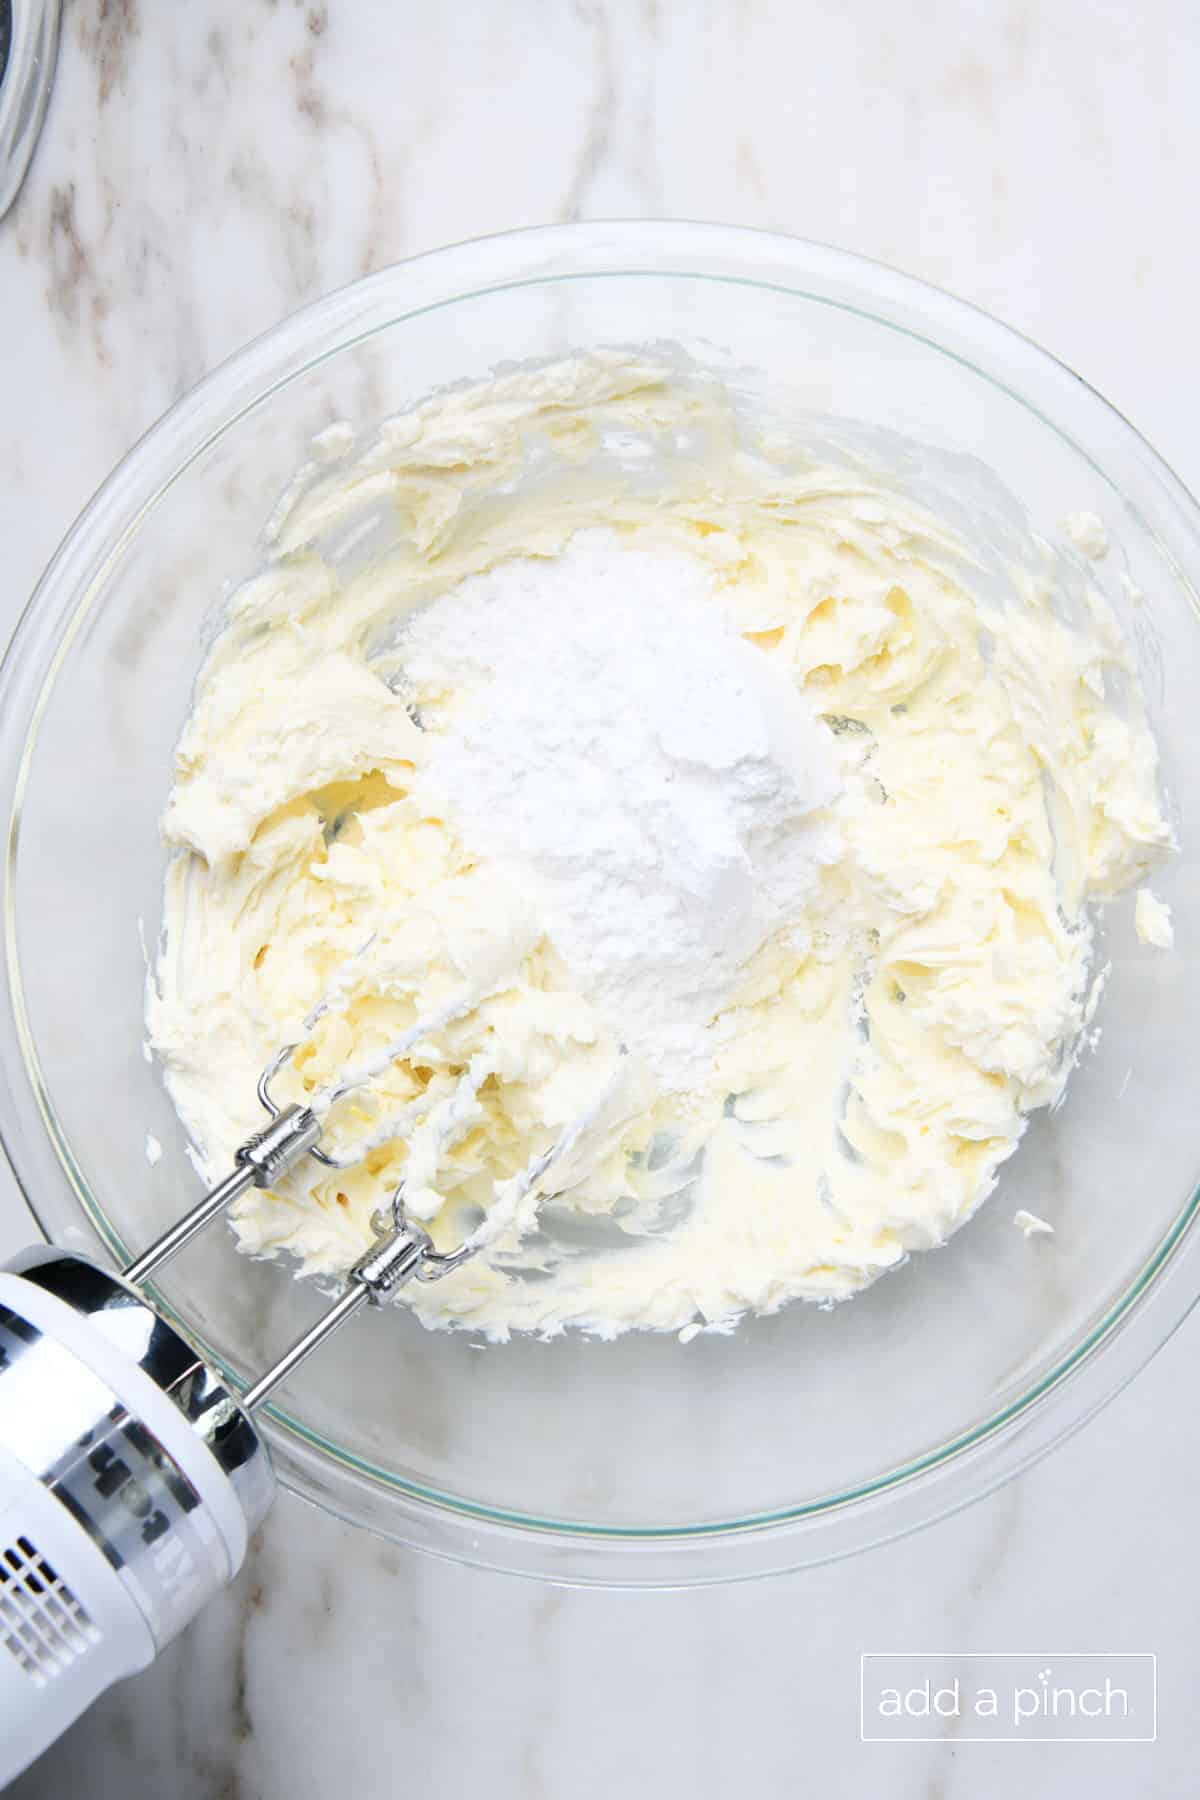 Glass mixing bowl with smooth cream cheese and butter with powdered sugar added.